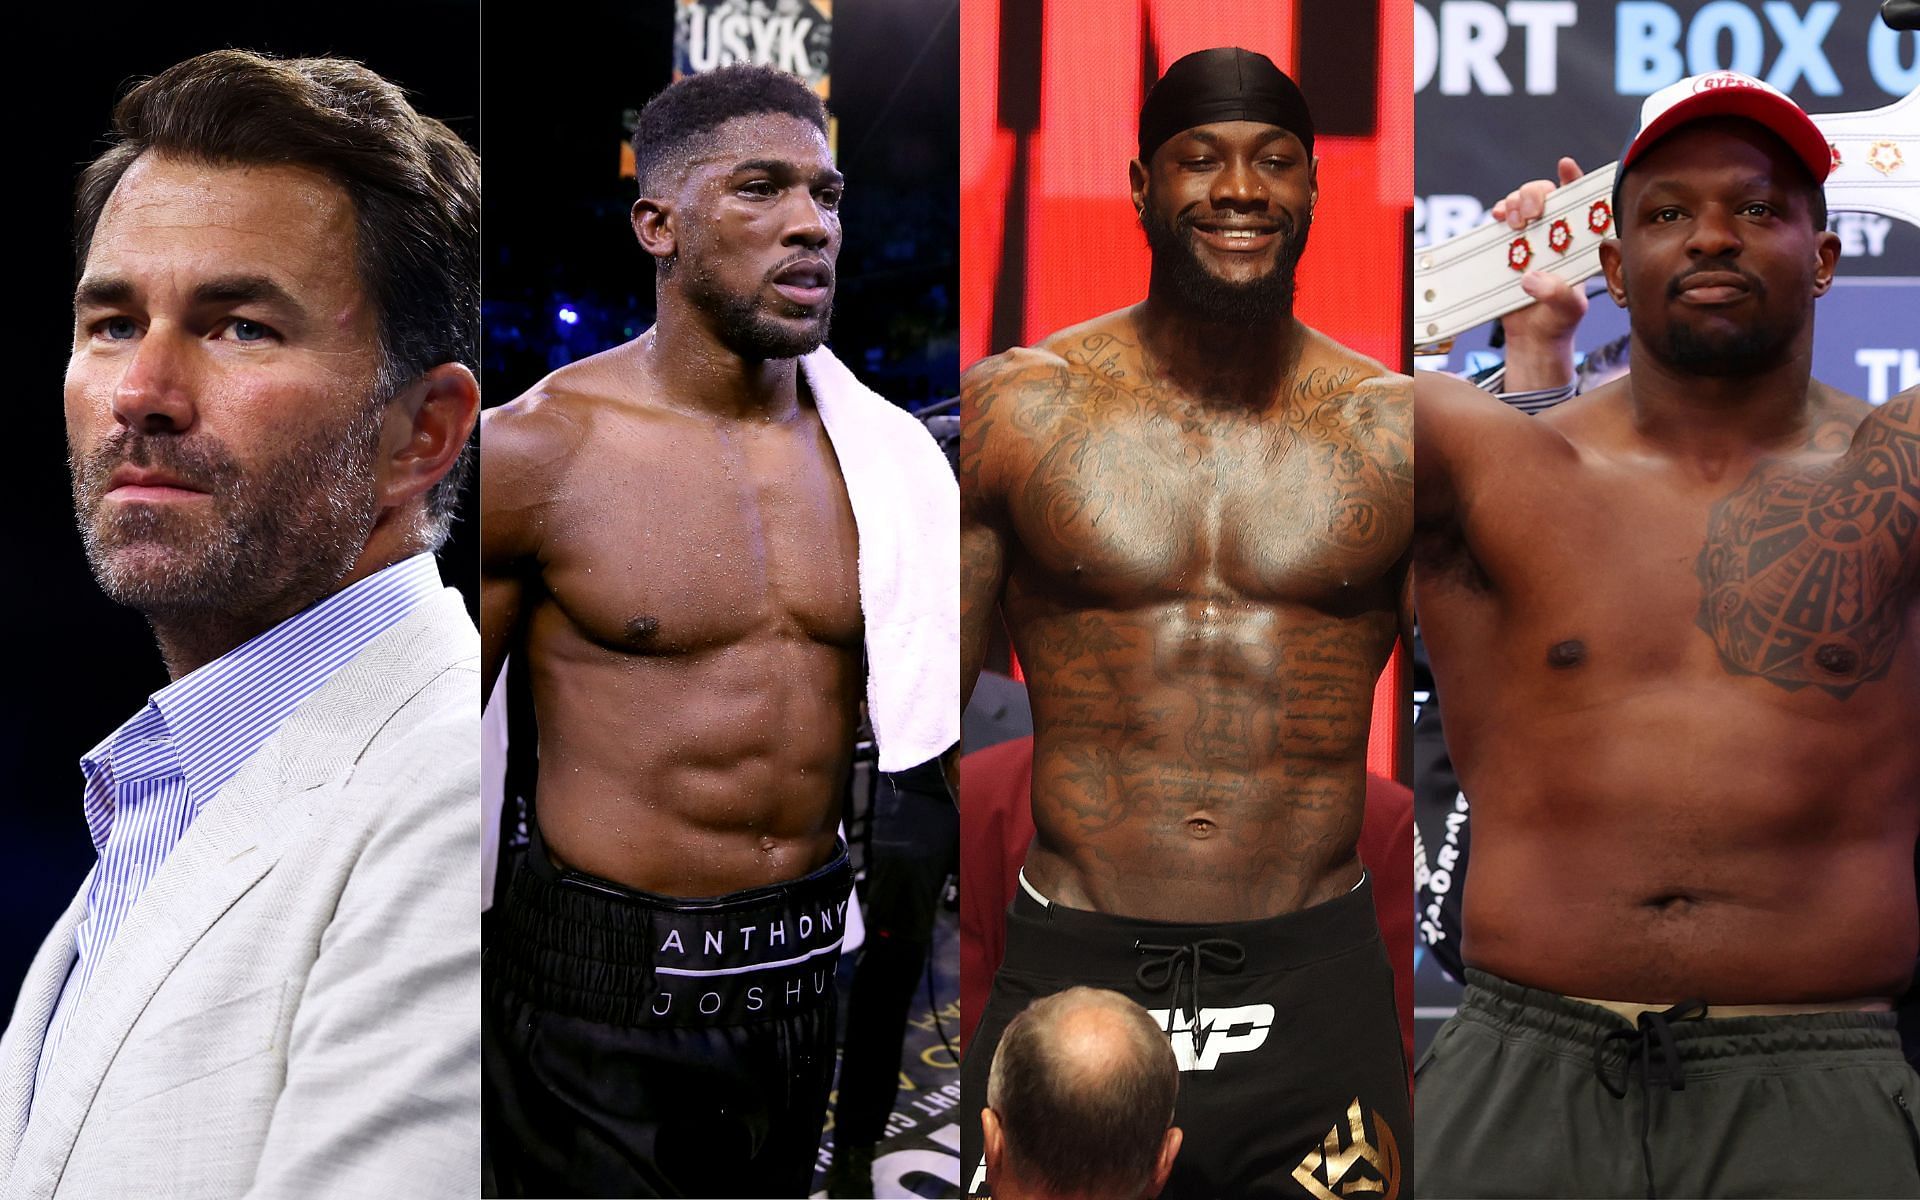 Eddie Hearn, Anthony Joshua, Deontay Wilder, and Dillian Whyte (Image credits Getty Images)